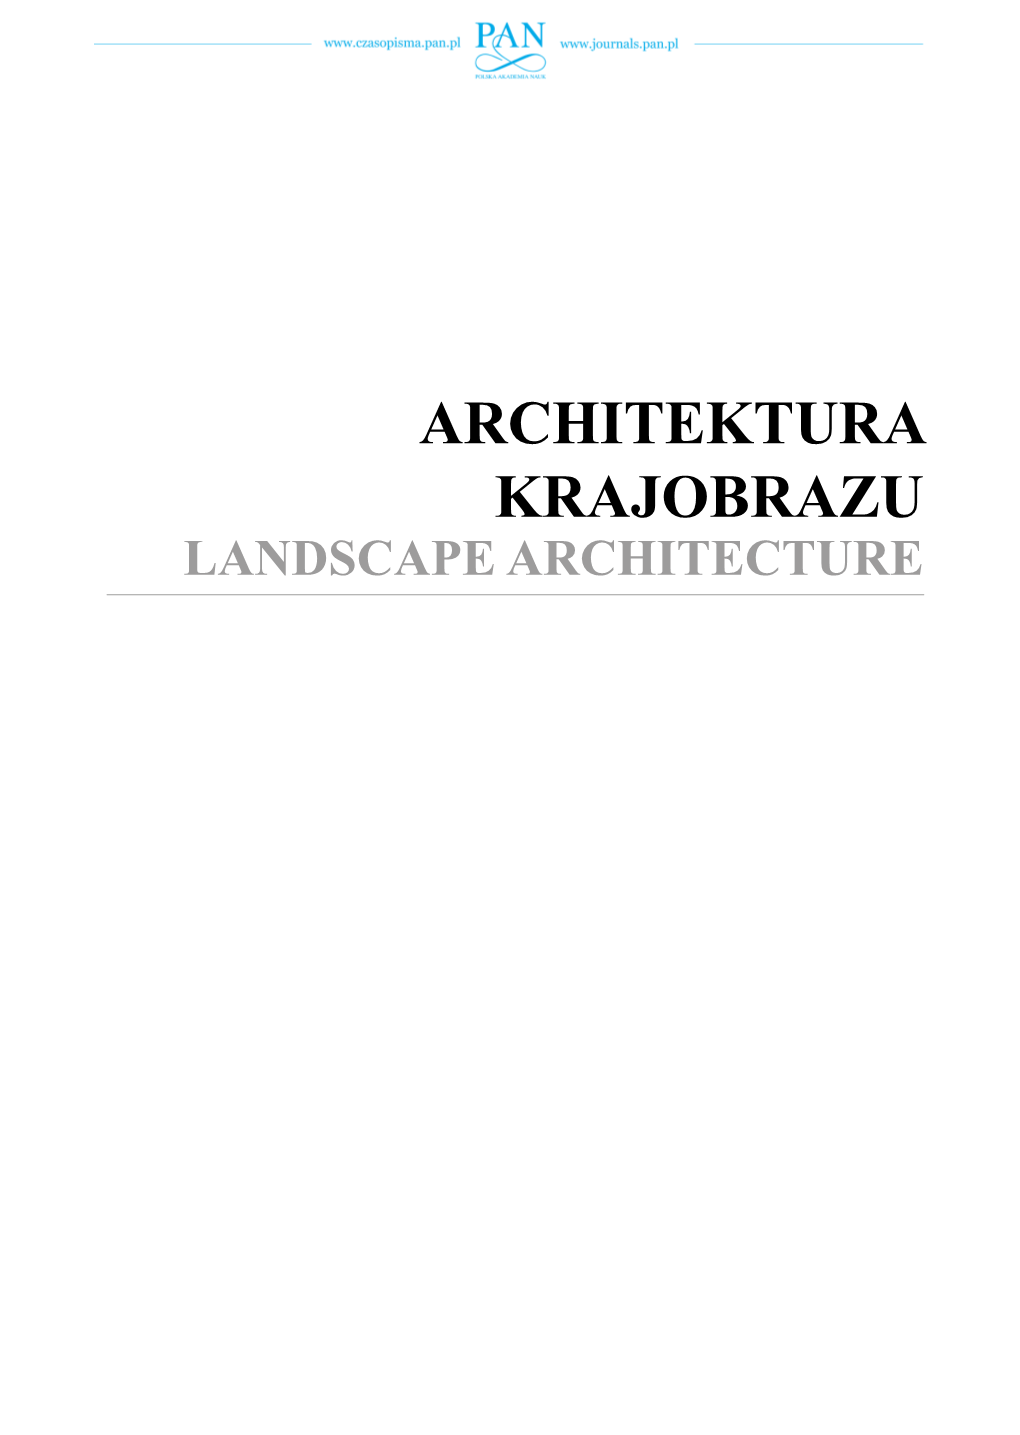 The Quality of the Landscape Architecture As a Result Of